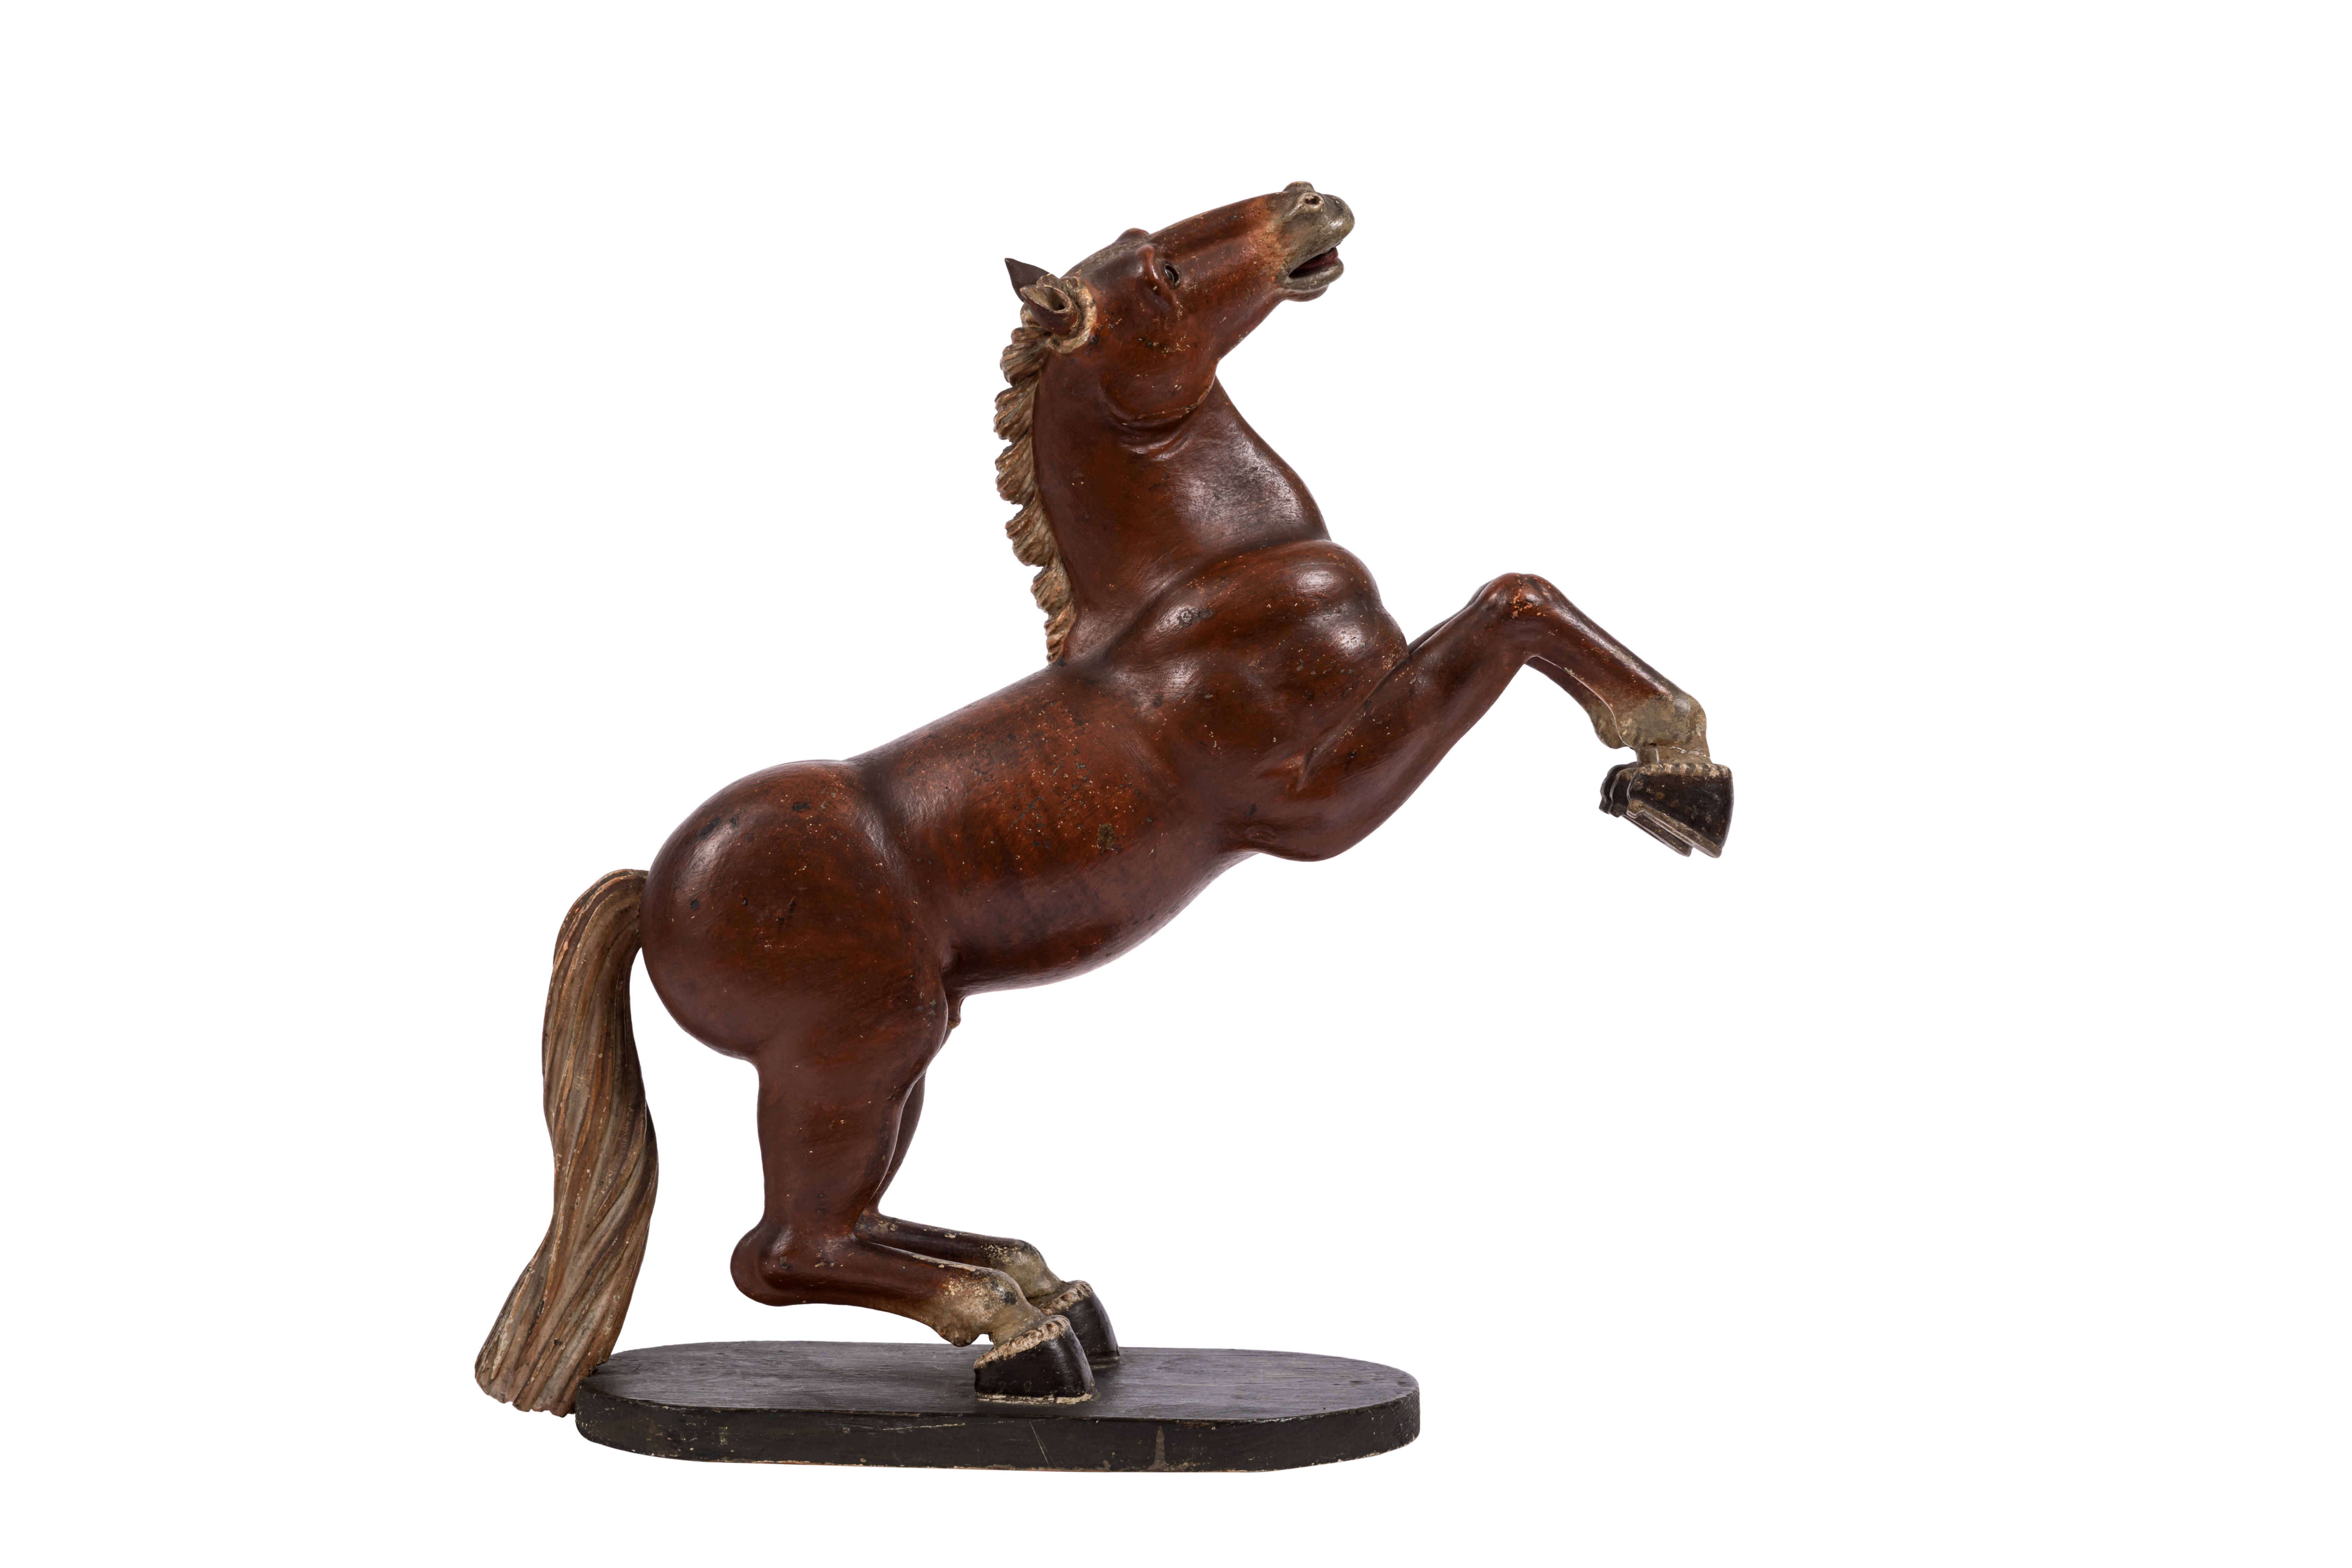 Carved and lacquered wooden horse for a Nativity | Vangelli Gallery